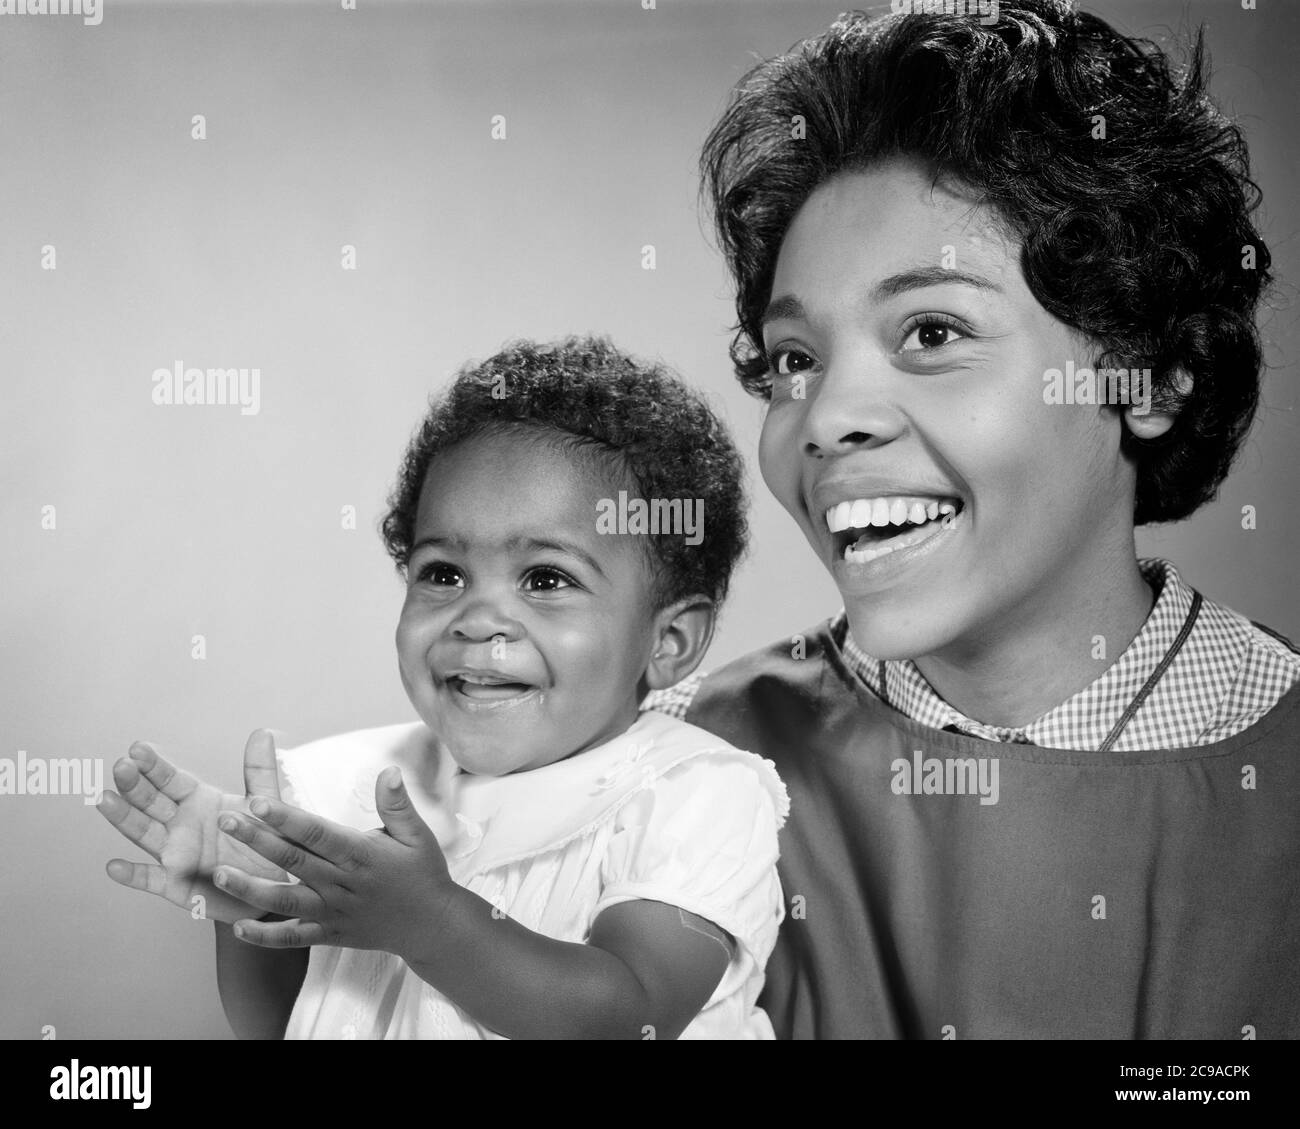 1960s LAUGHING WOMAN AFRICAN-AMERICAN MOTHER LOOKING OFF CAMERA SIDE-BY-SIDE WITH HER SMILING DAUGHTER WHO IS CLAPPING HANDS - n2157 HAR001 HARS PAIR BEAUTY COMMUNITY SUBURBAN URBAN HER MOTHERS EXPRESSION OLD TIME NOSTALGIA OLD FASHION 1 JUVENILE FACIAL COMMUNICATION LAUGH YOUNG ADULT TEAMWORK PLEASED JOY LIFESTYLE SATISFACTION CELEBRATION FEMALES CLAPPING HEALTHINESS HOME LIFE COPY SPACE LADIES DAUGHTERS PERSONS CARING SERENITY SPIRITUALITY CONFIDENCE EXPRESSIONS B&W DREAMS HAPPINESS HEAD AND SHOULDERS CHEERFUL PROTECTION AFRICAN-AMERICANS AFRICAN-AMERICAN EXCITEMENT BLACK ETHNICITY PRIDE Stock Photo